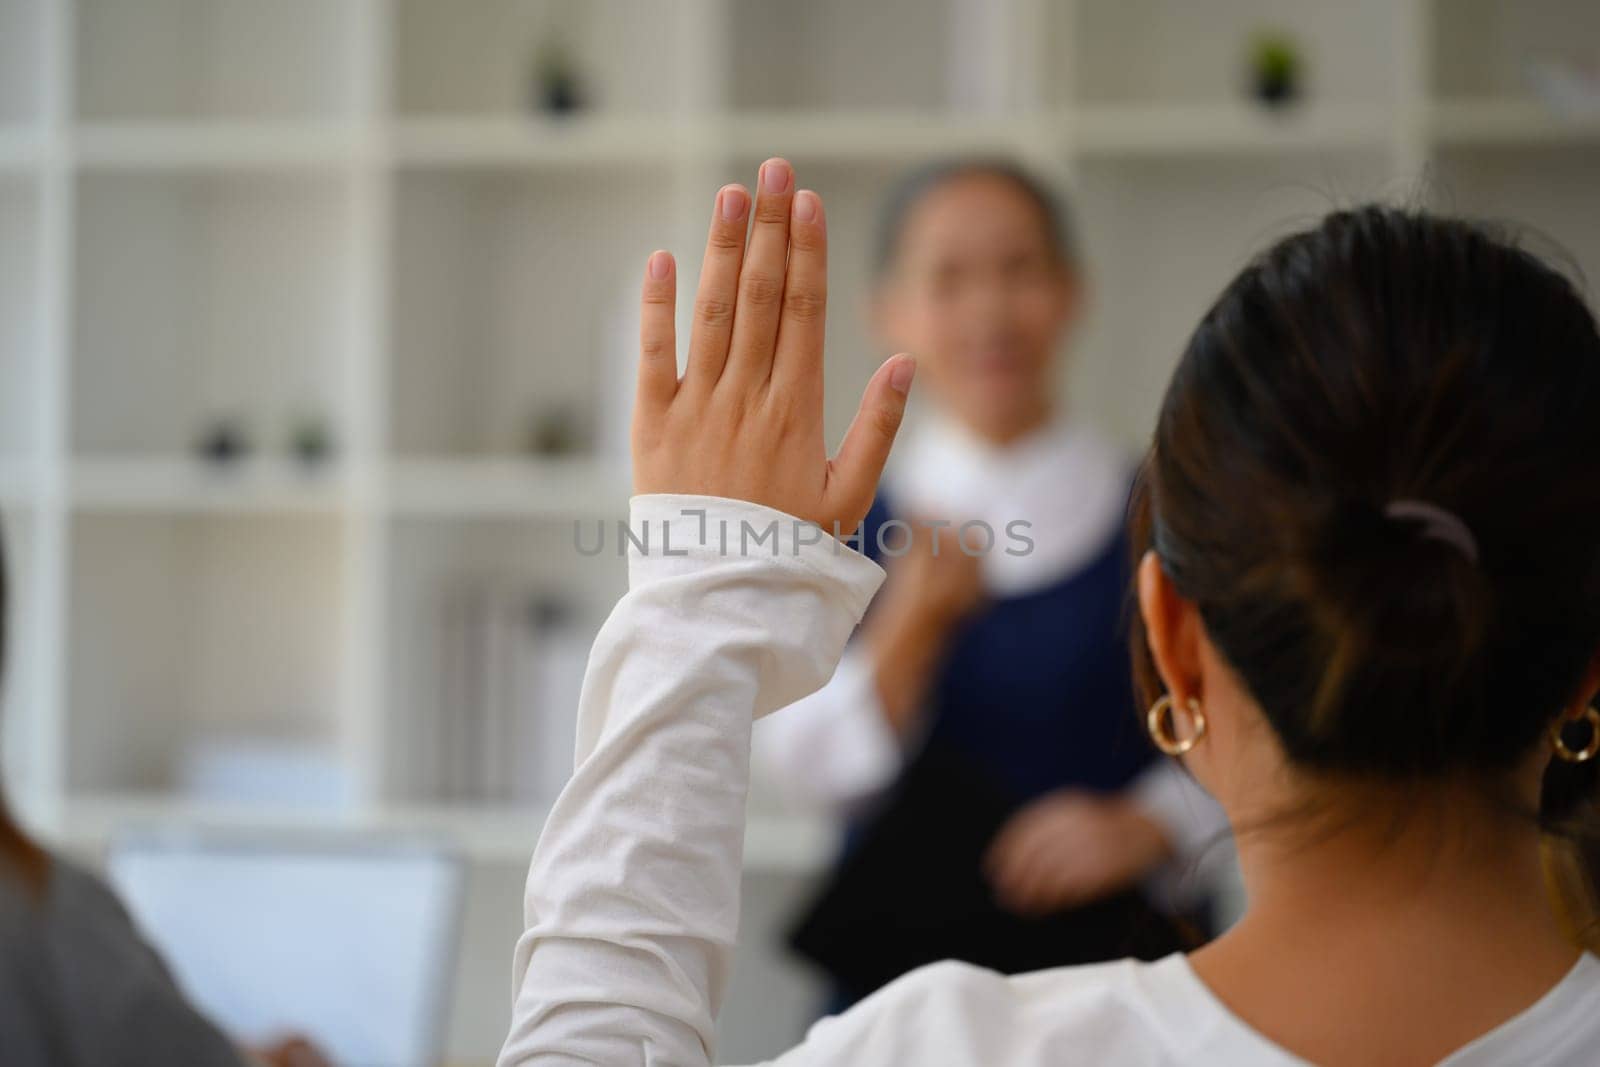 Back view of female college student raising hand to answering a question during lecture.